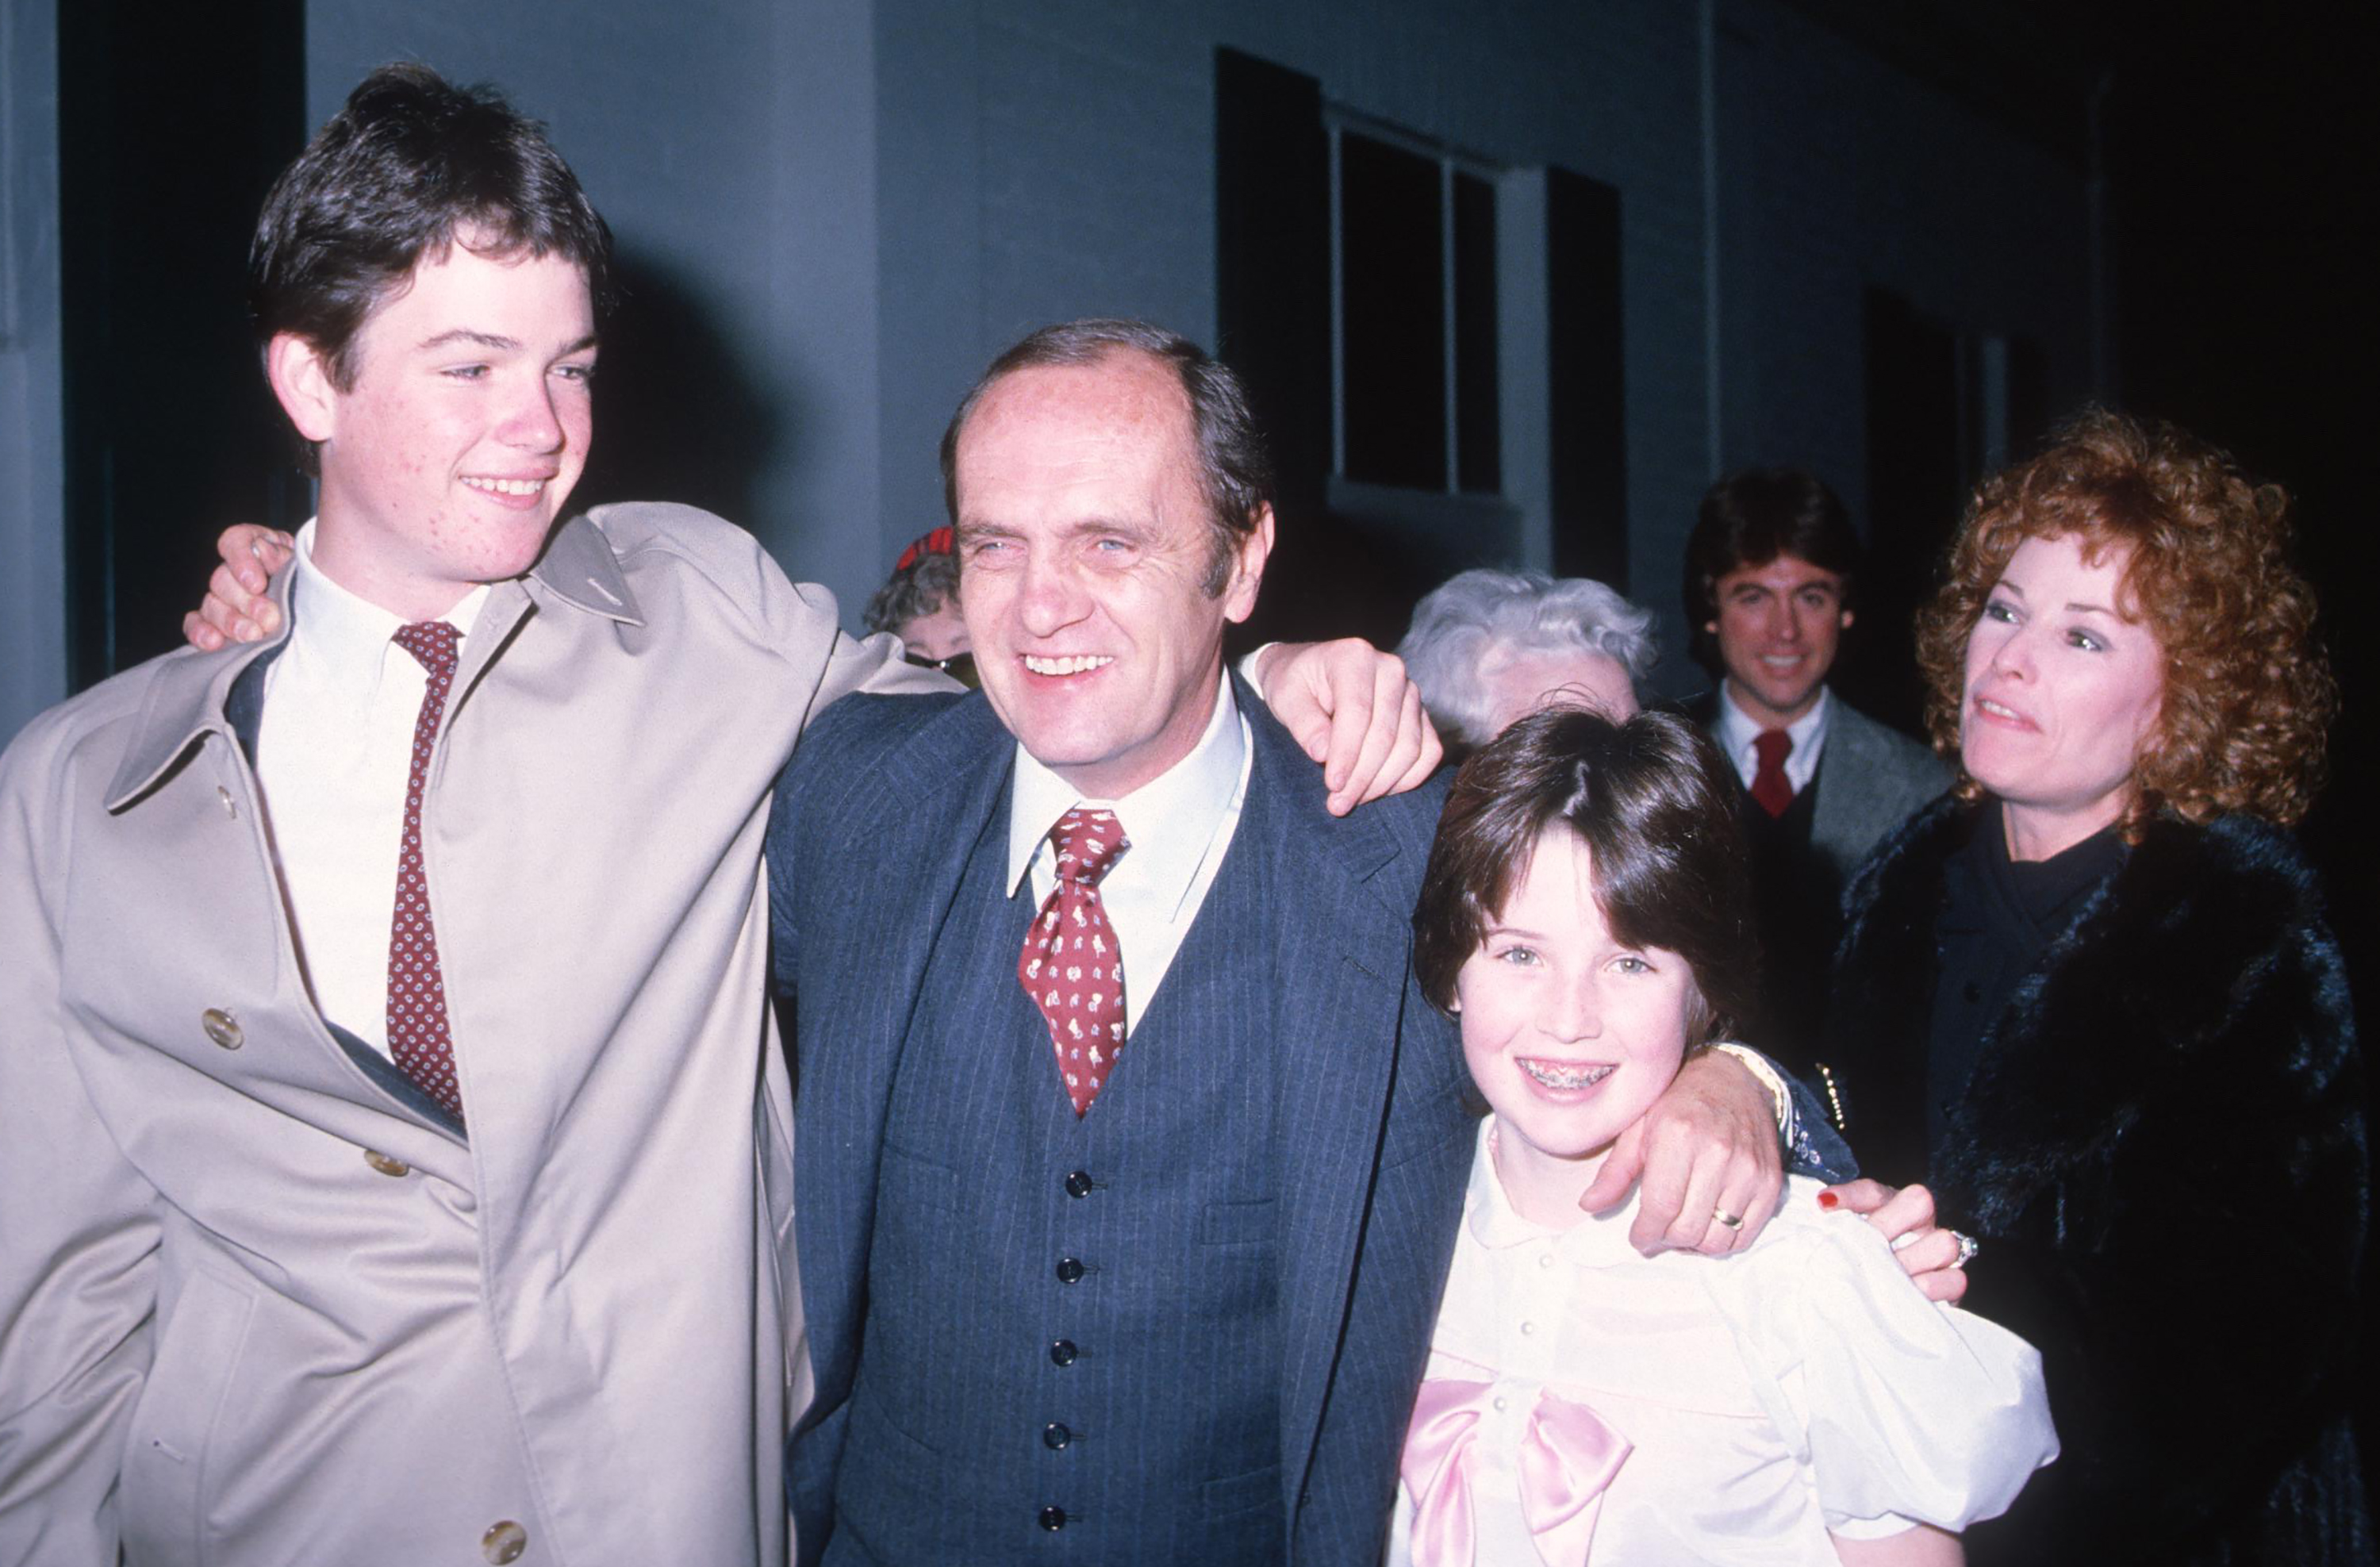 Bob Newhart with his wife Ginnie Newhart and their family attend Party Honoring Quincy Jones at Chasen's Restaurant on March 6, 1983 in Beverly Hills, California | Source: Getty Images